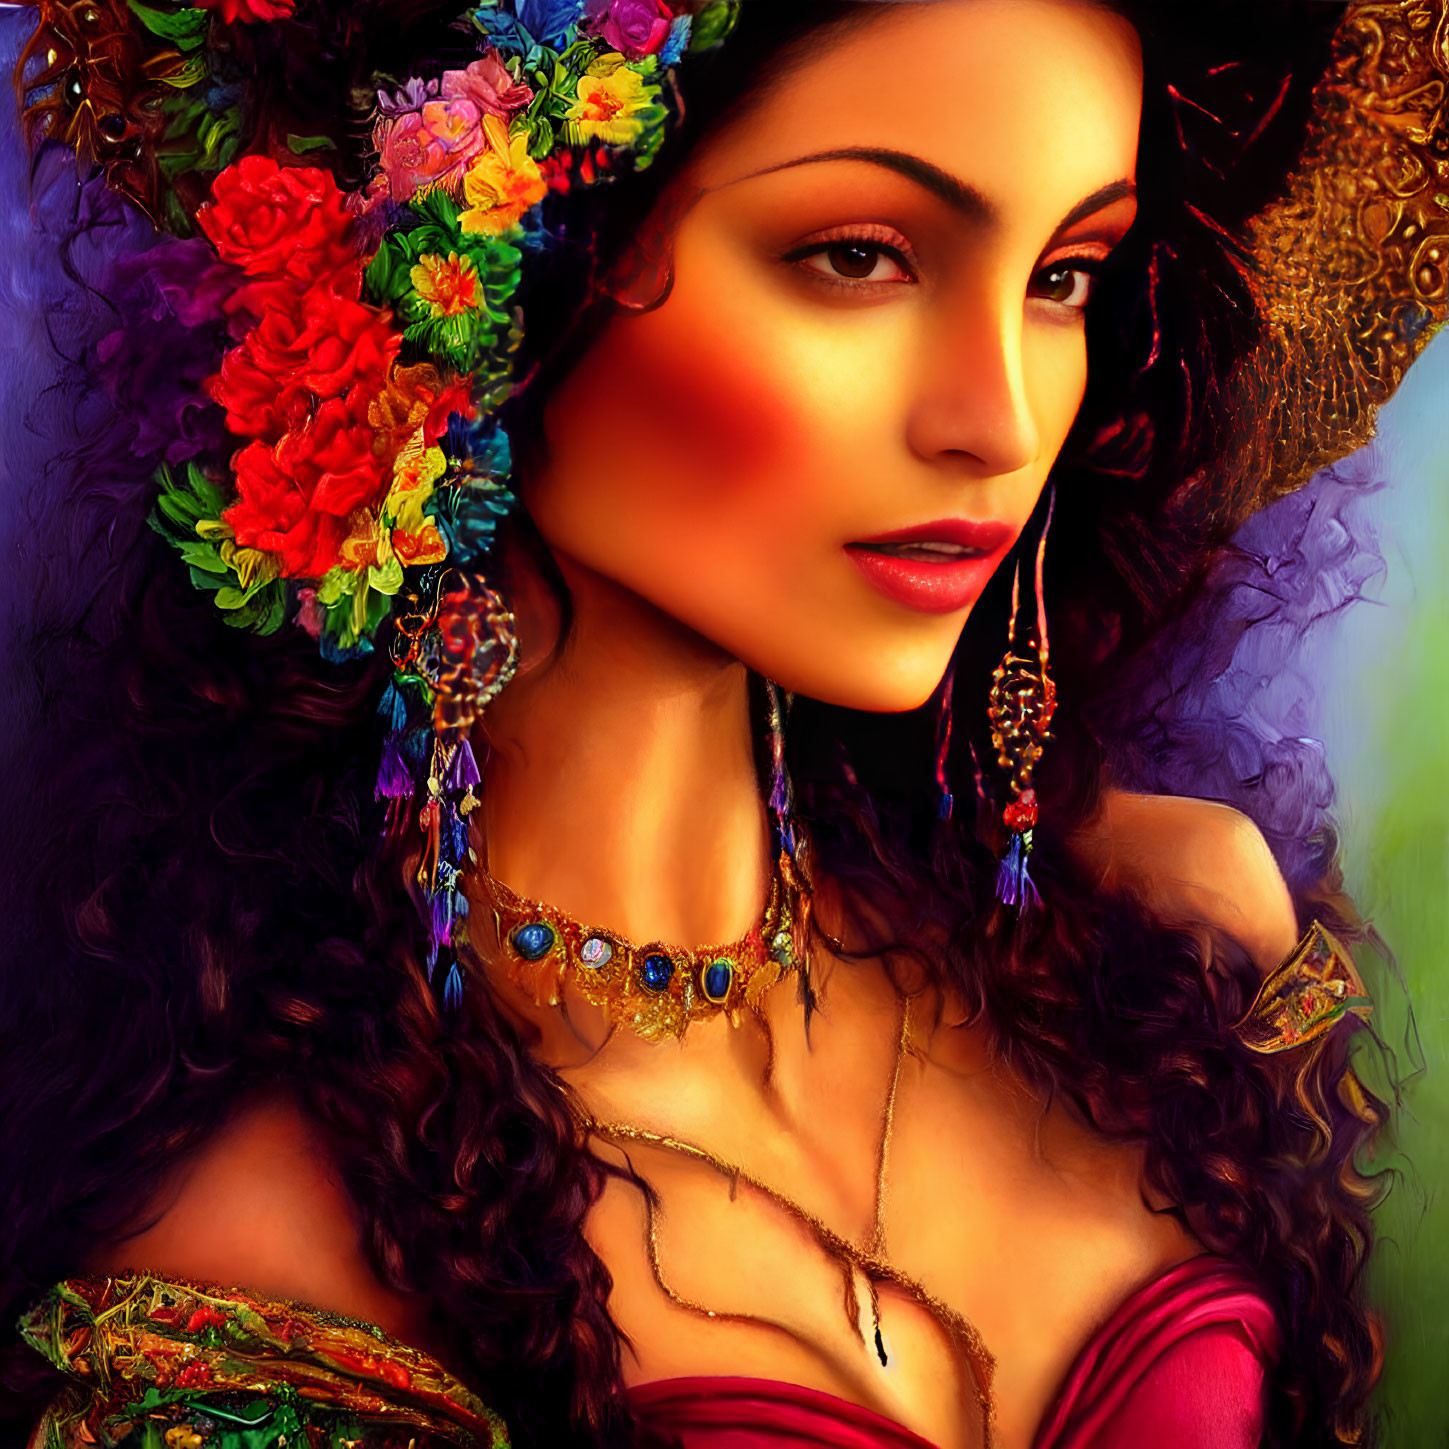 Colorful digital painting of a woman in floral headdress and elegant attire.